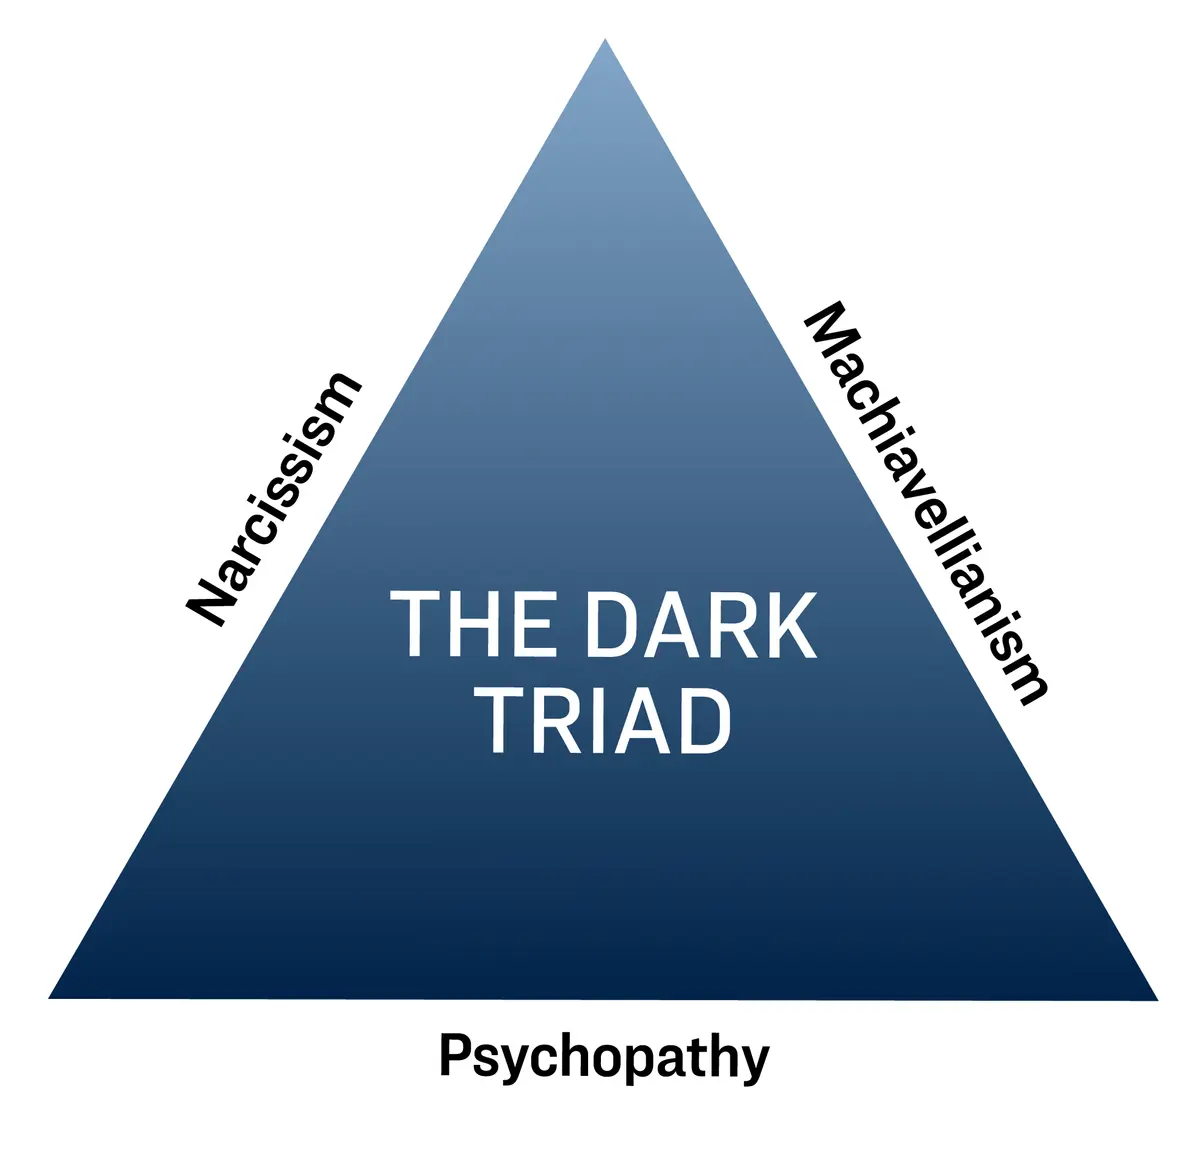  Machiavellianism is one of the traits in the dark triad model, along with psychopathy and narcissism. (wikipedia.org)